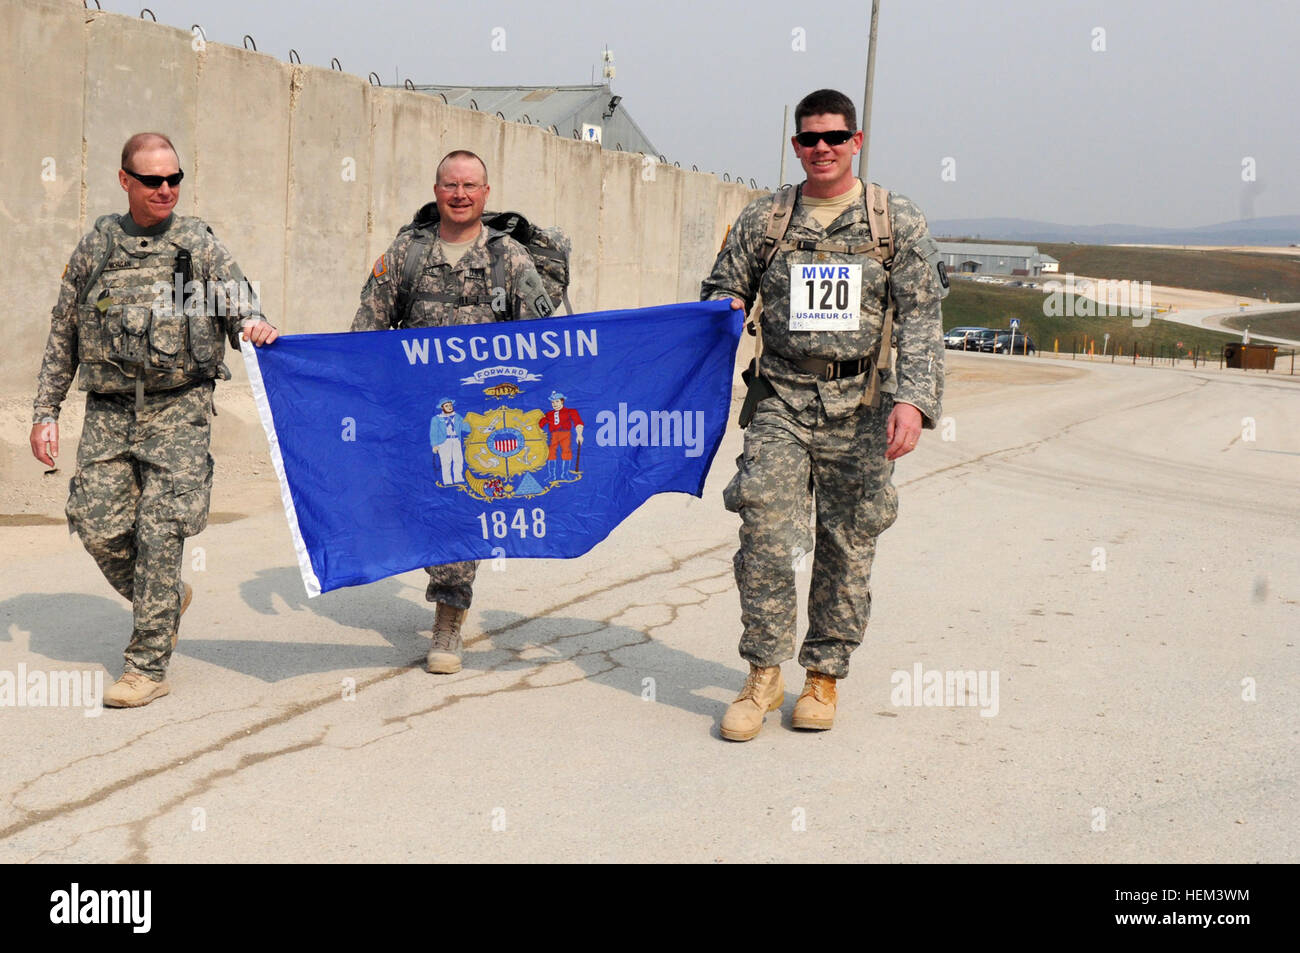 Wisconsin Army National Guard Soldiers (left to right) Lt. Col. Kerry Morgan, chief of staff; Lt. Col. Jon Russell, operations officer; and Maj. Matthew Beilfuss, deputy operations officer, cross the finish line of the 13.1-mile Bataan Memorial Death March at Camp Bondsteel, Kosovo March 26. The Soldiers are assigned to Multinational Battle Group East. Task Force Falcon photo Bataan Memorial Death March at Camp Bondsteel 791103 Stock Photo